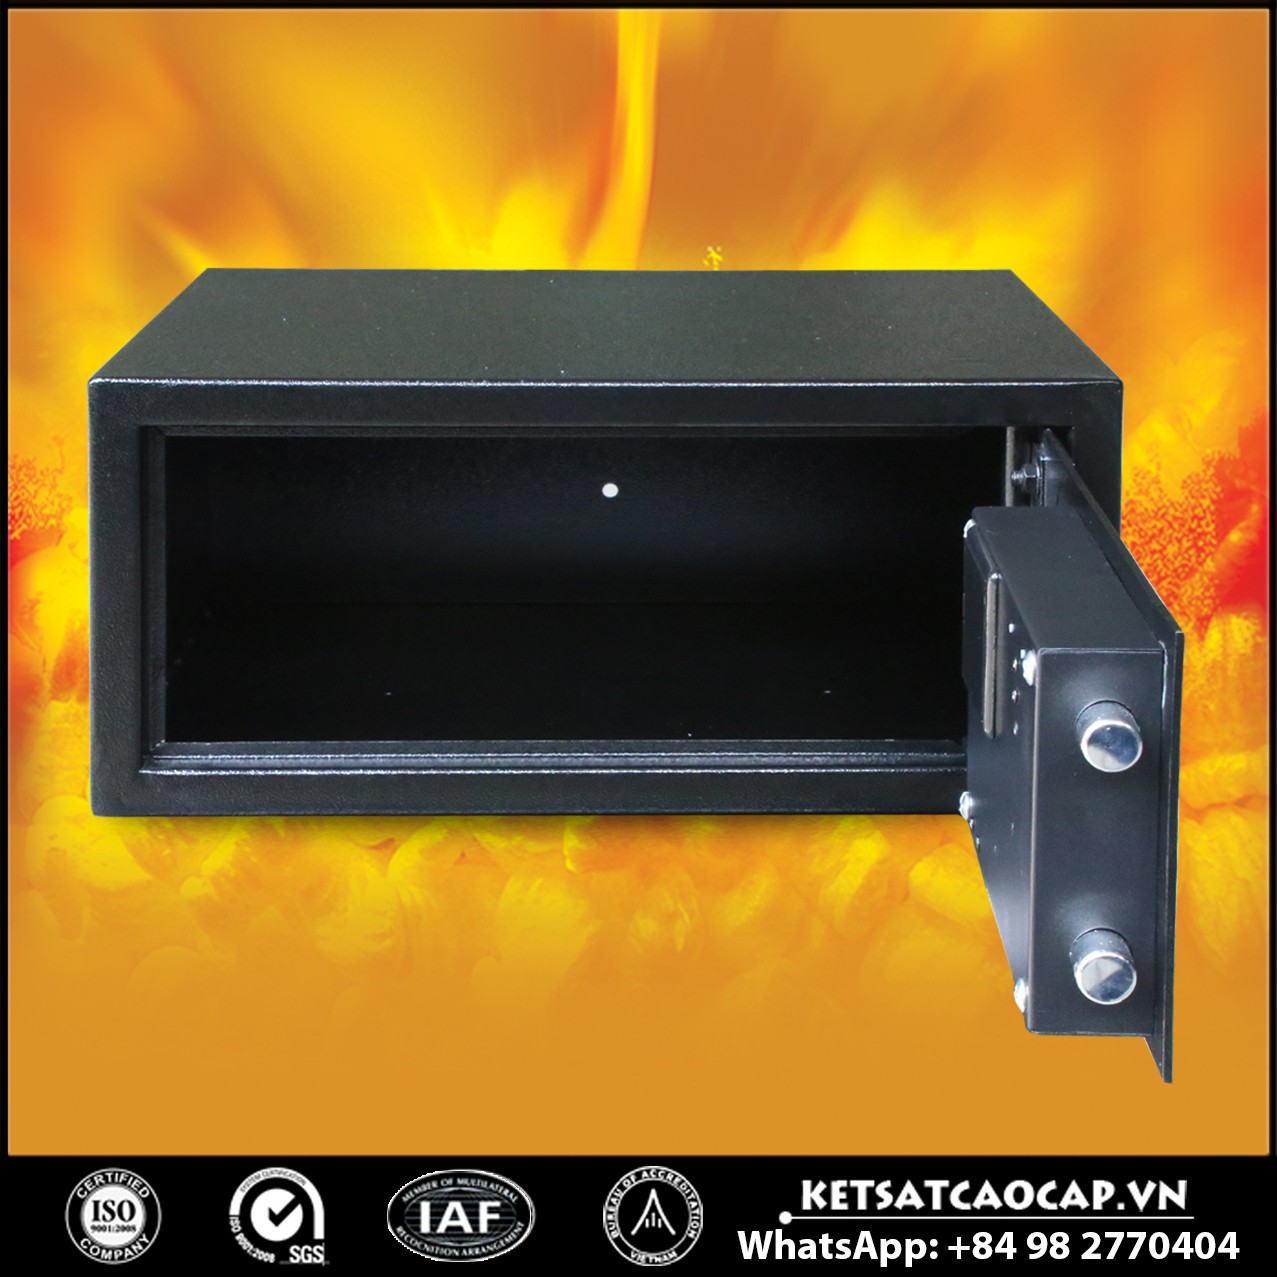 Portable Hotel Safes Manufacturers & Suppliers‎